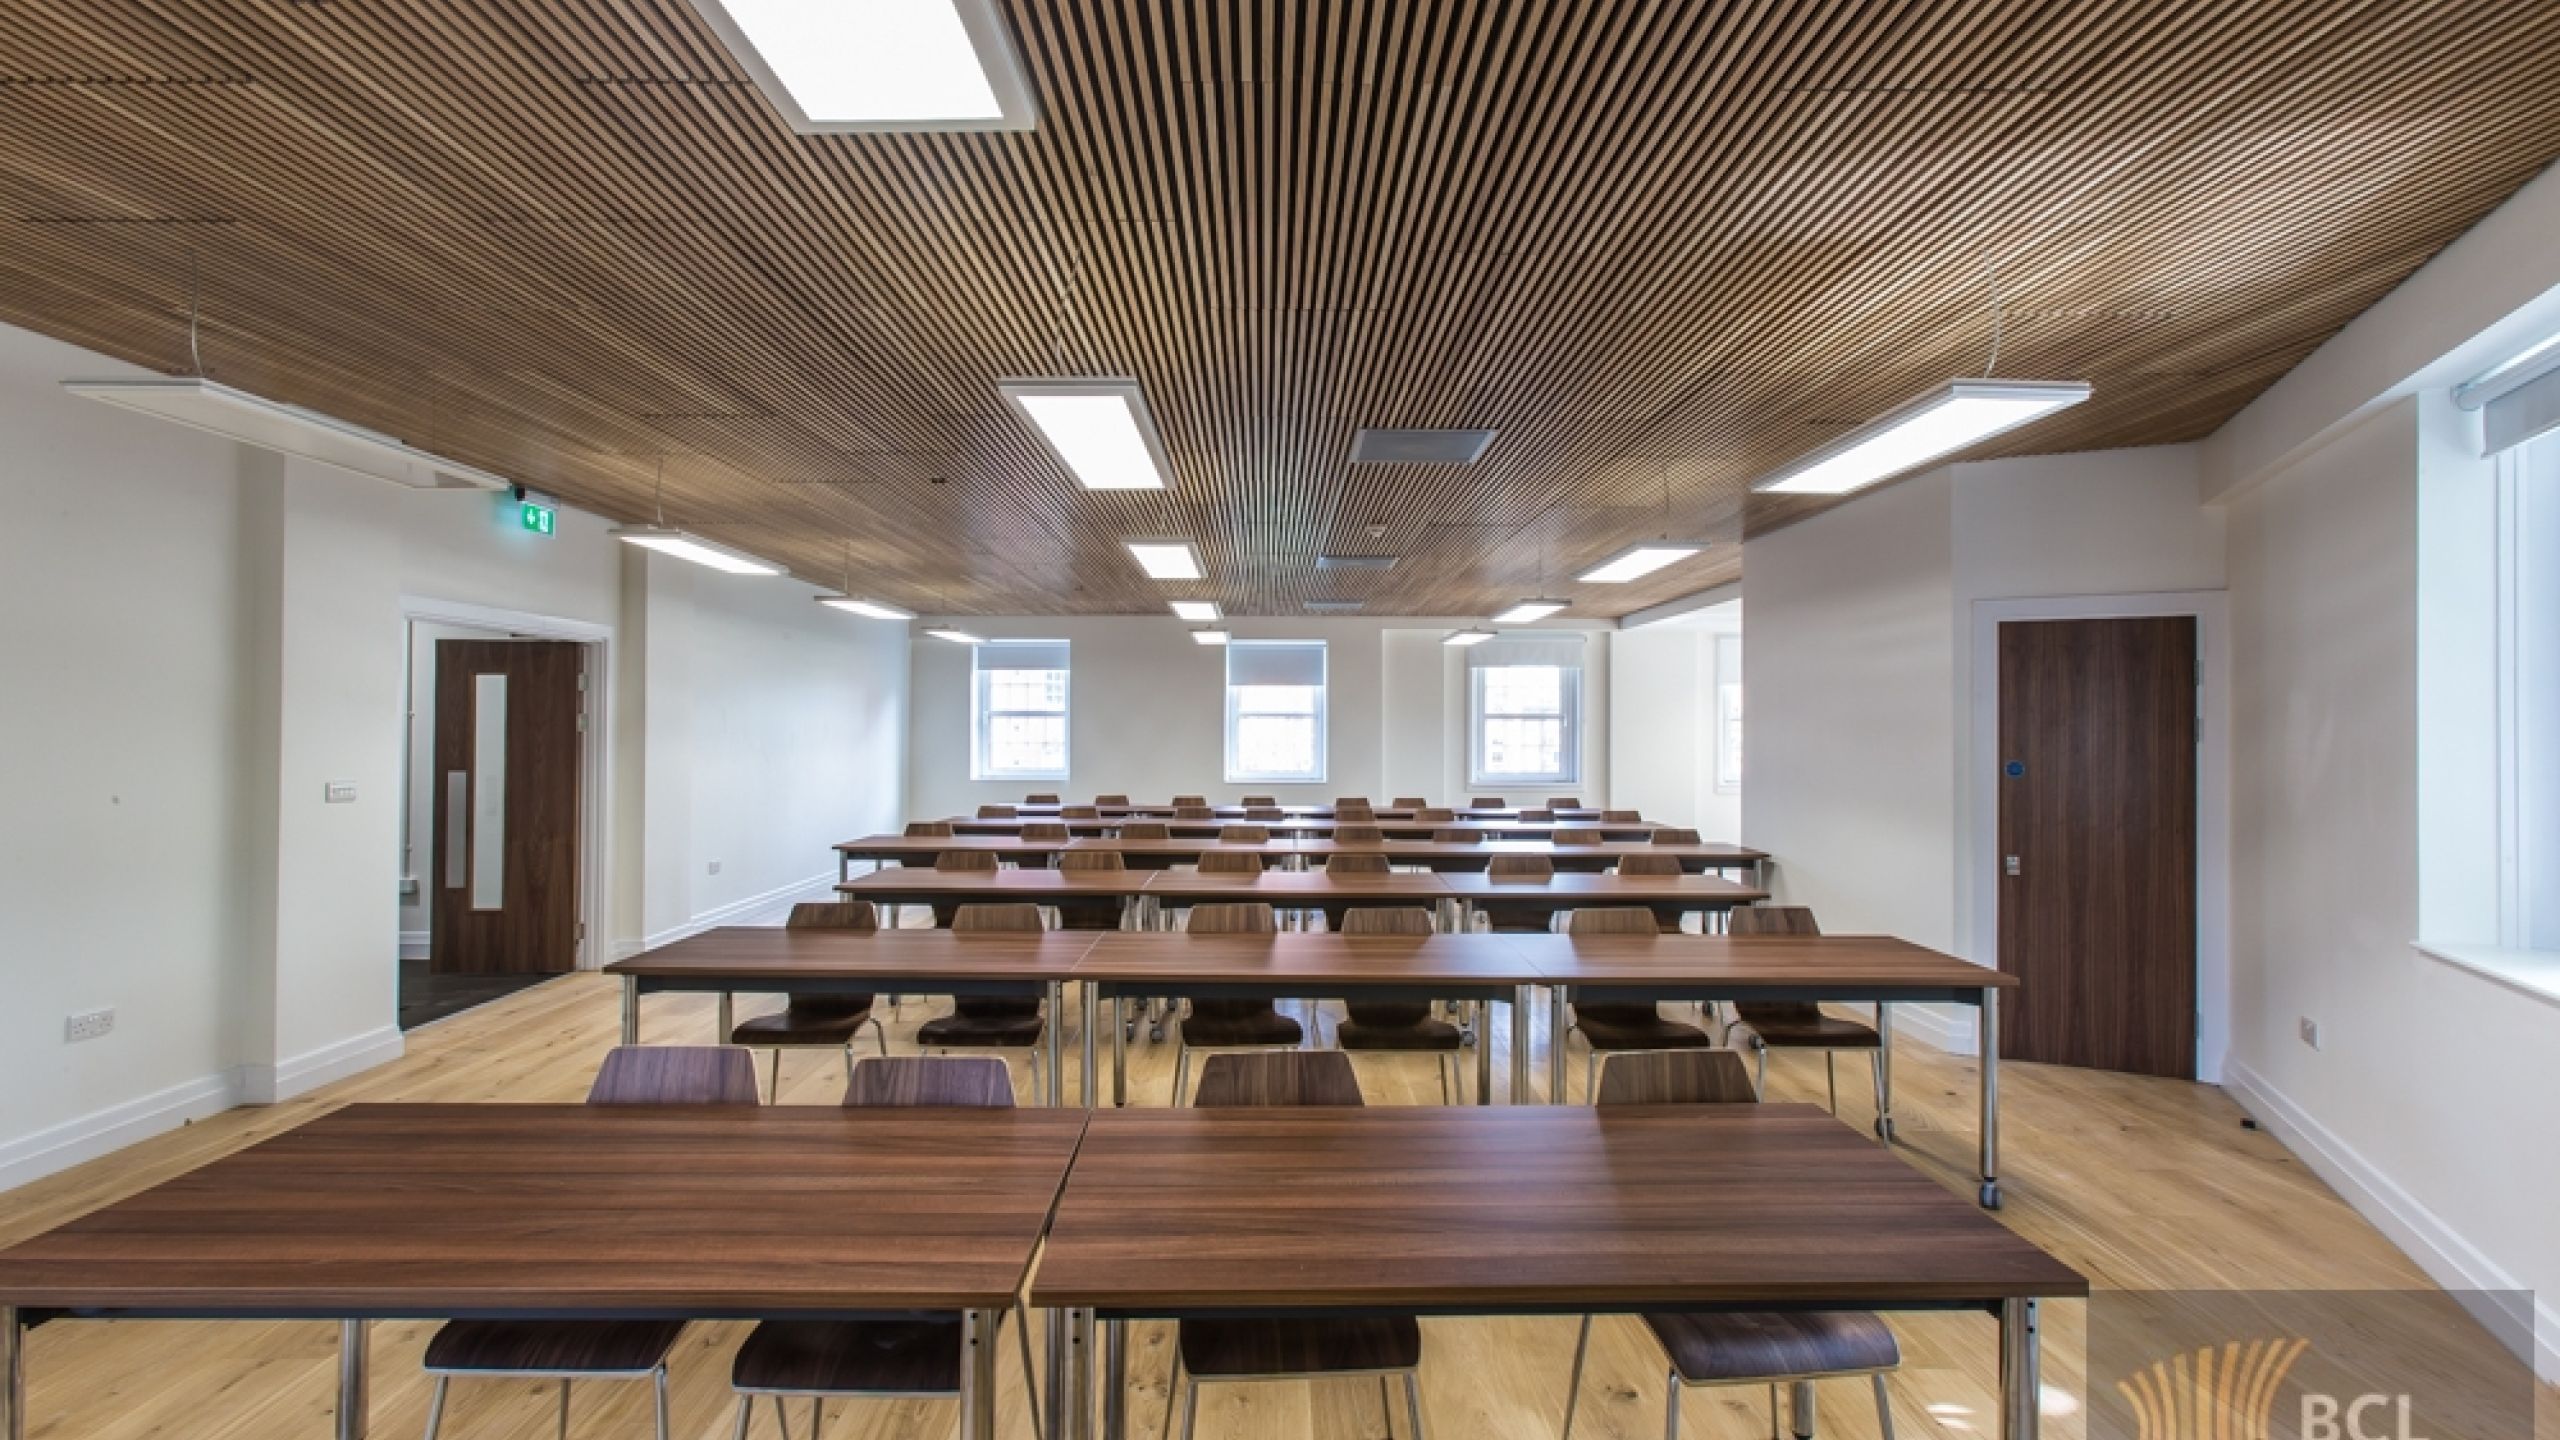 Science and Health Building, Coventry University with BCL Timber slat ceilings